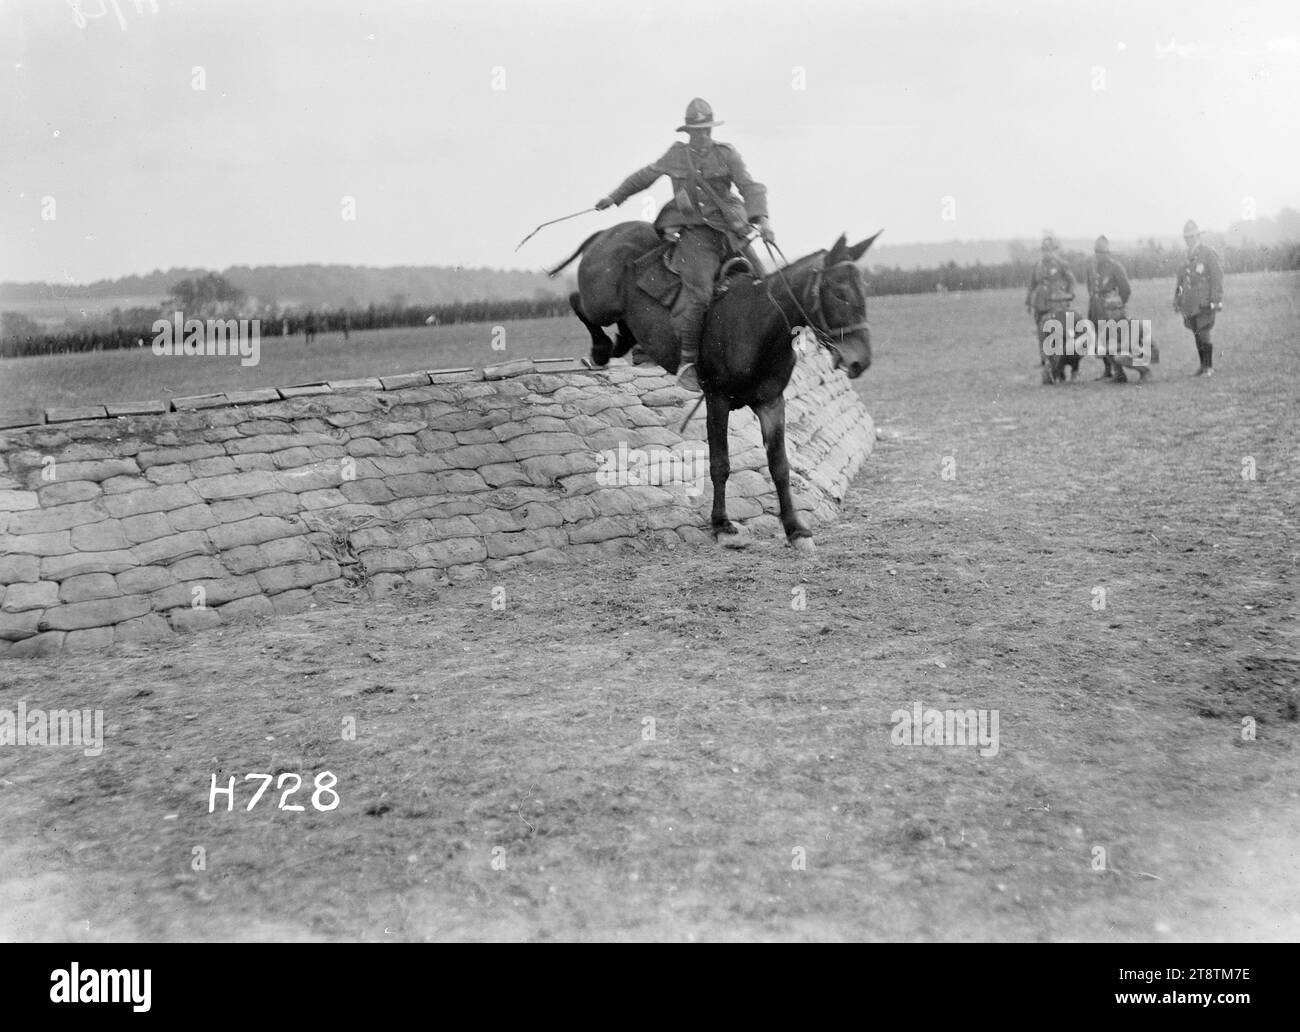 A mule jumper at a New Zealand Divisional sports competition, Authie, A remarkable mule jumper clearing the same jump as horses in the jumping contest at the New Zealand Divisional sports held at Authie, France during World War I. Photograph taken 23 July 1918 Stock Photo